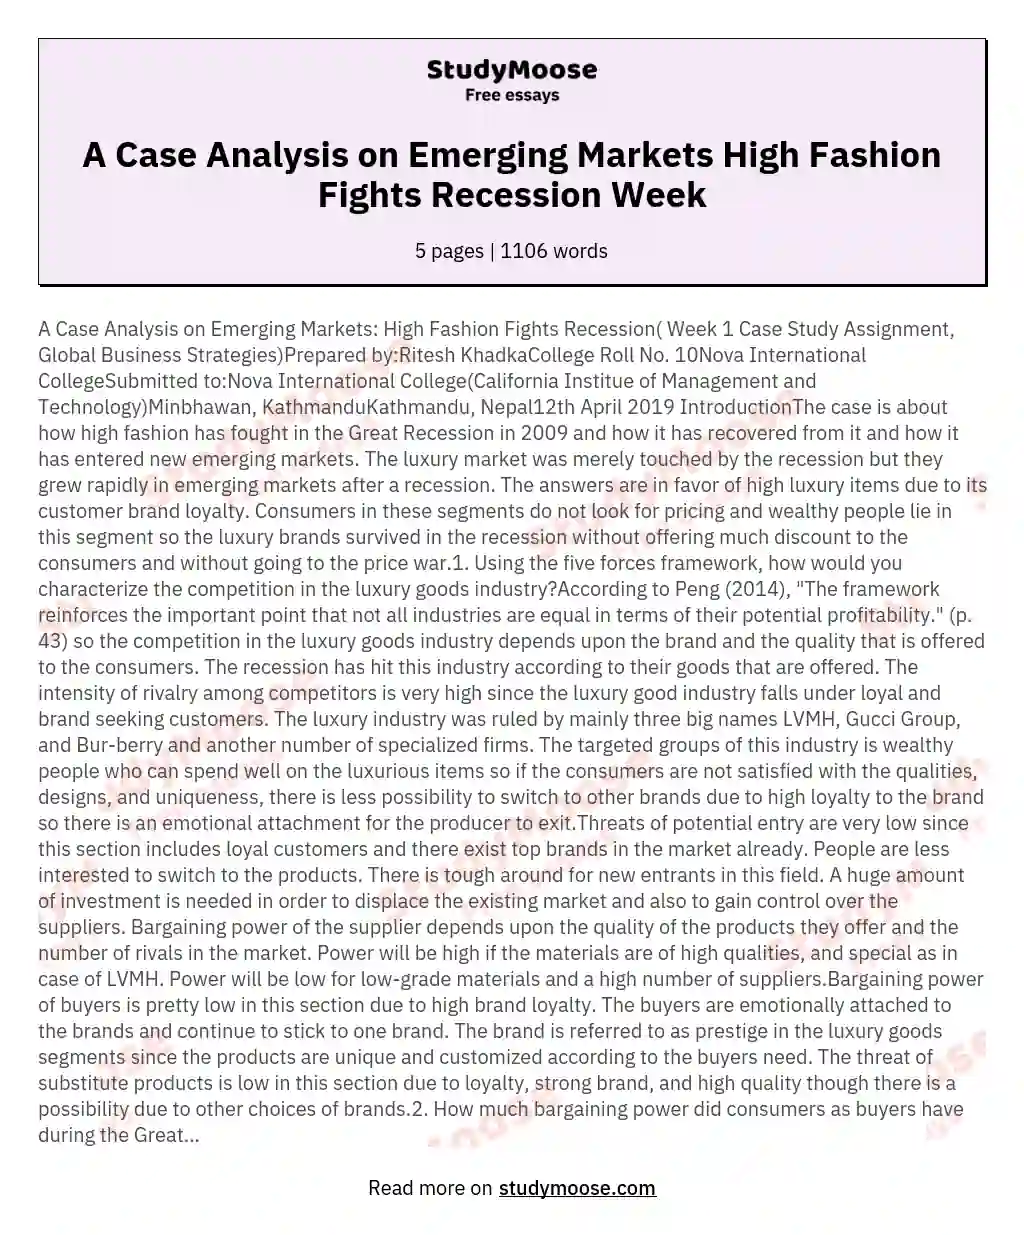 A Case Analysis on Emerging Markets High Fashion Fights Recession Week essay